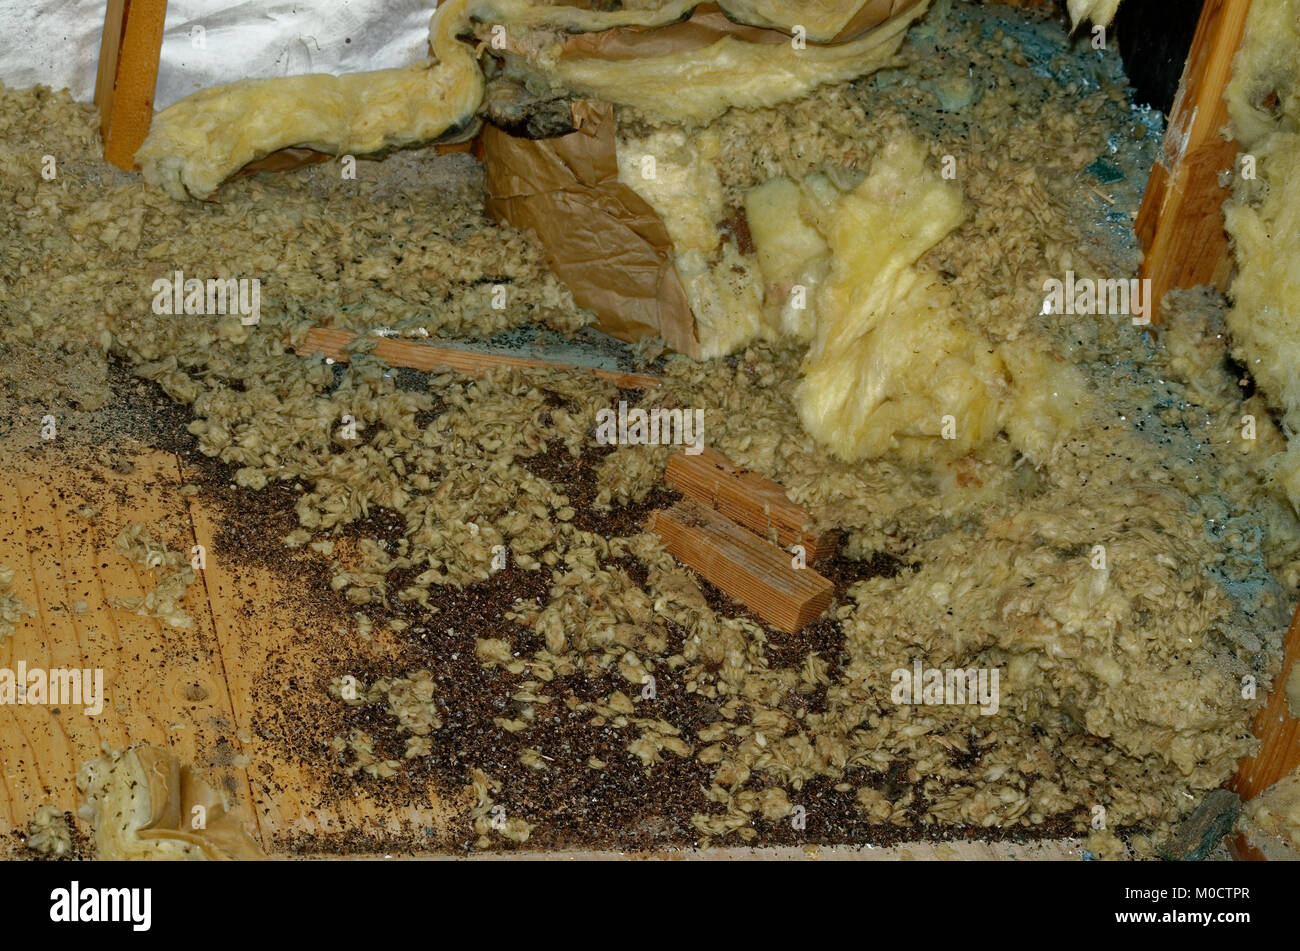 Mice piled food, feces and insulation Stock Photo